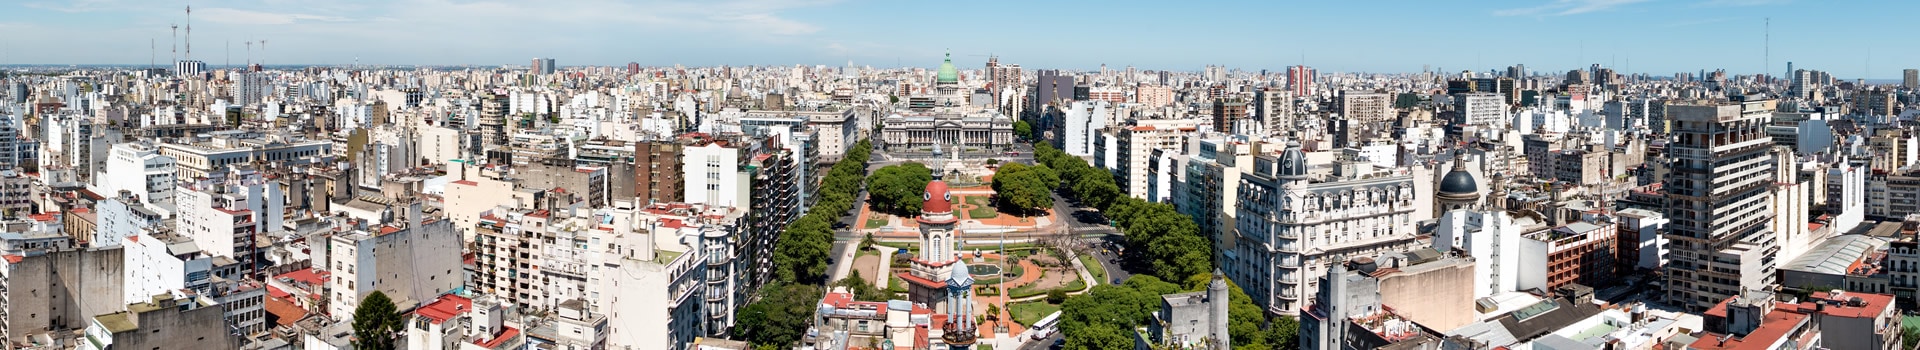 Guayaquil - Buenos aires